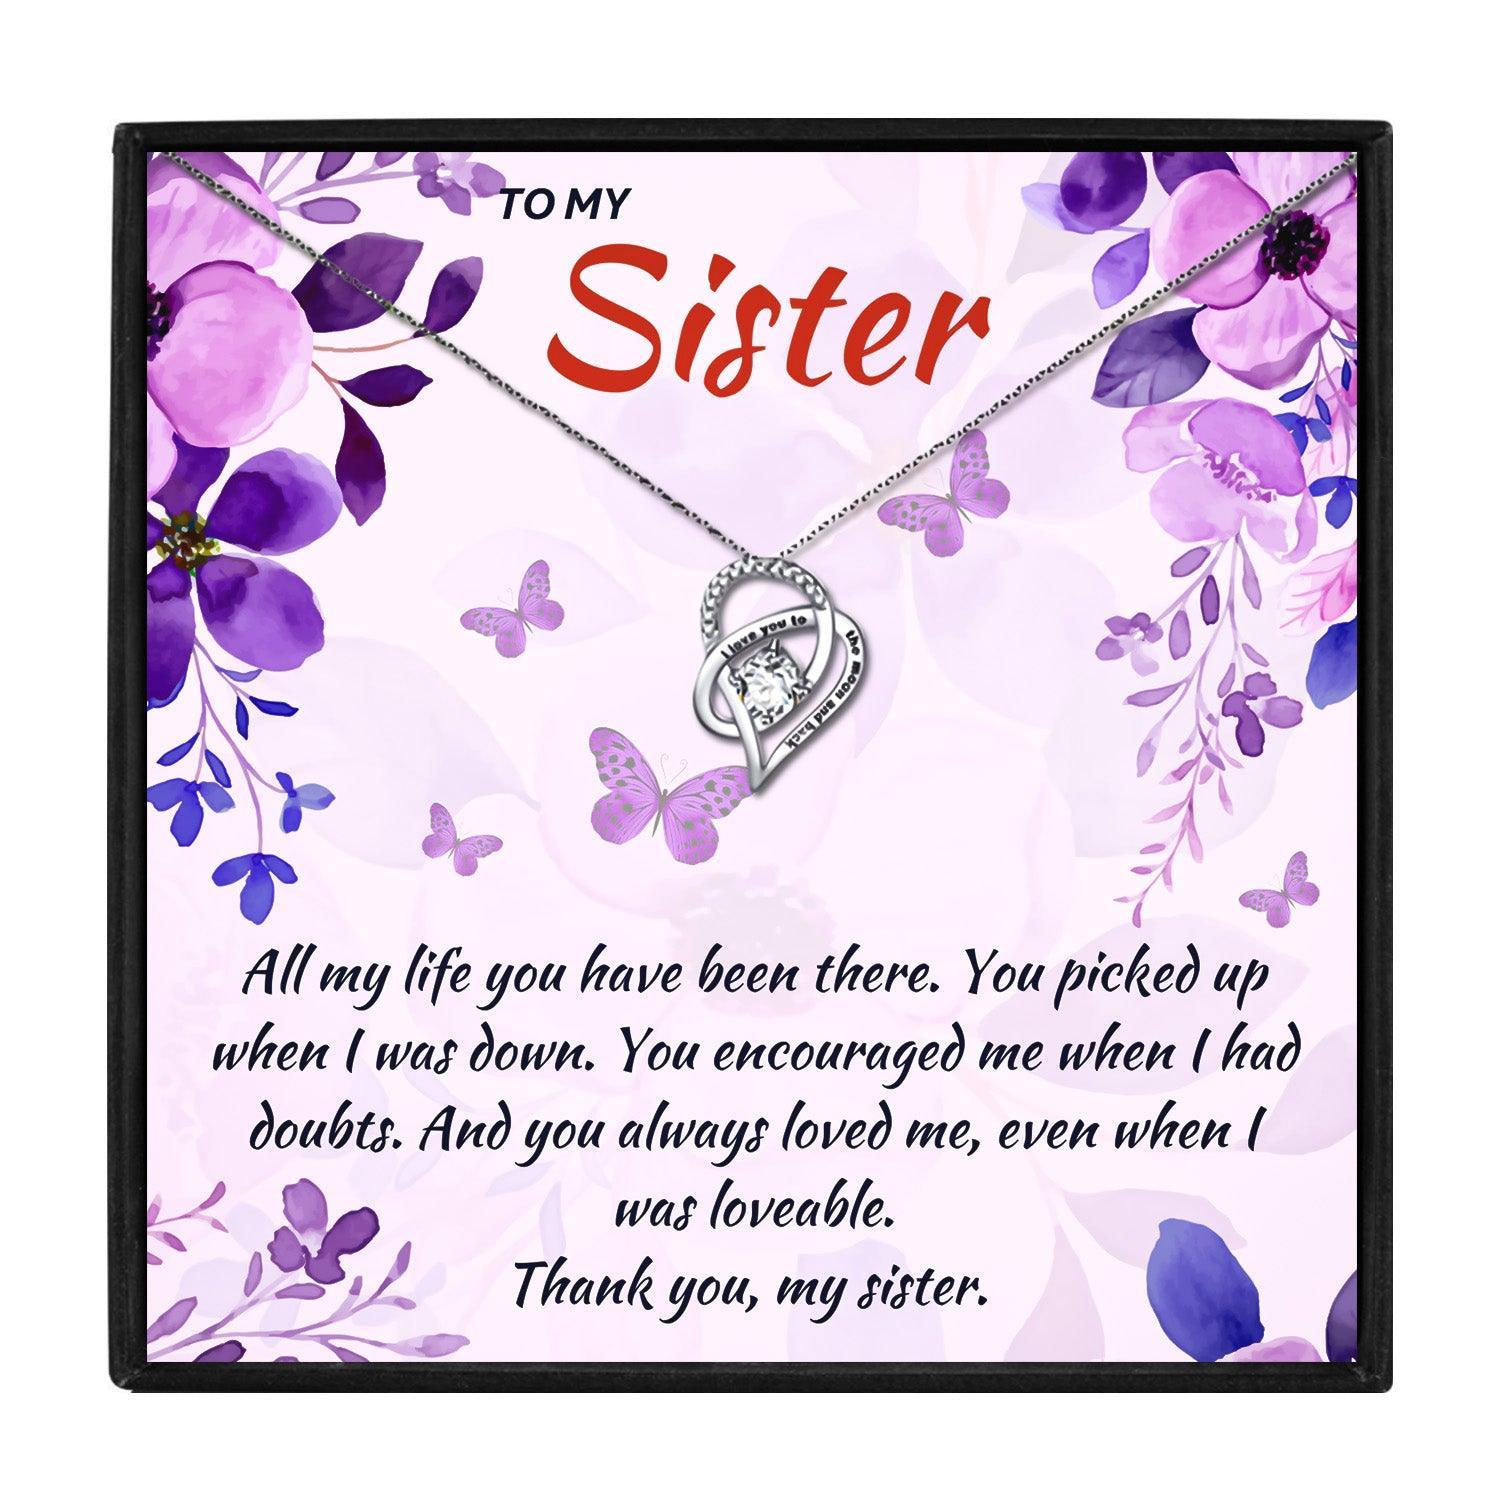 To My Sister Friendship Necklaces Gift Set for Christmas 2023 | To My Sister Friendship Necklaces Gift Set - undefined | gift for sister, Gifts for Sister, Necklace for Sister, Necklace Gift for Sister, sister gift ideas | From Hunny Life | hunnylife.com